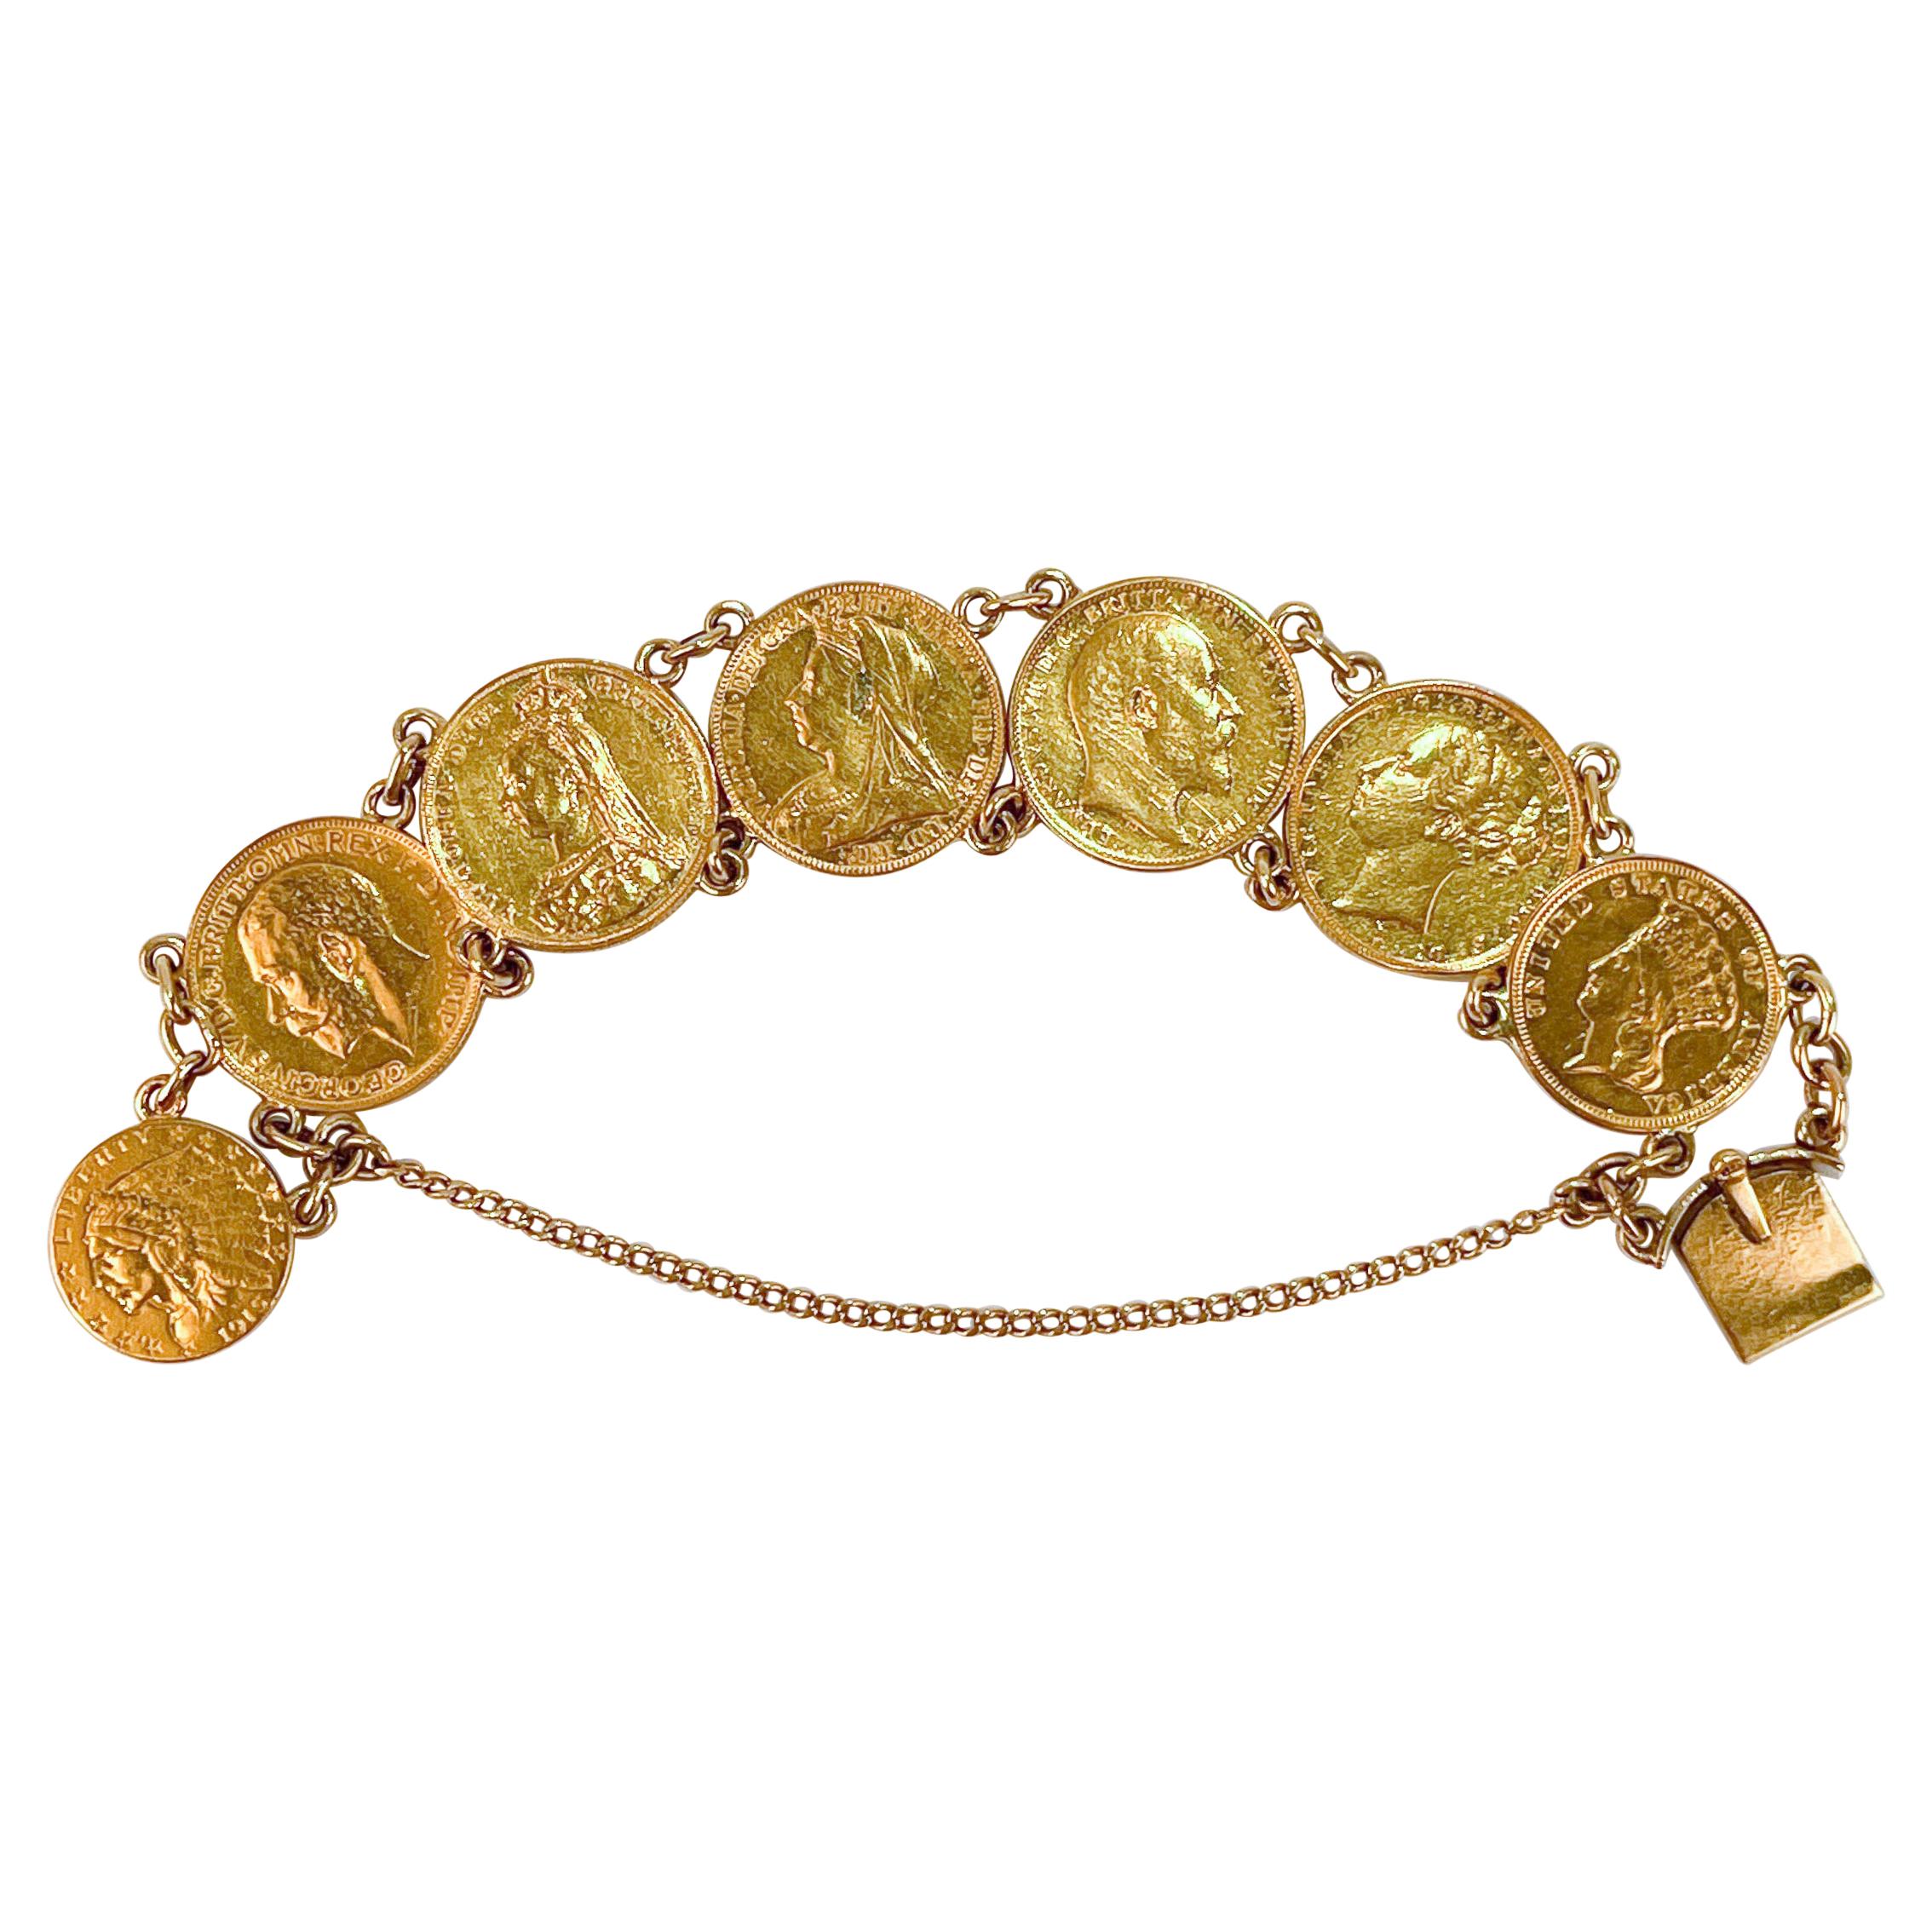 Antique Coin Bracelet with American Gold Coins & English Gold Sovereigns